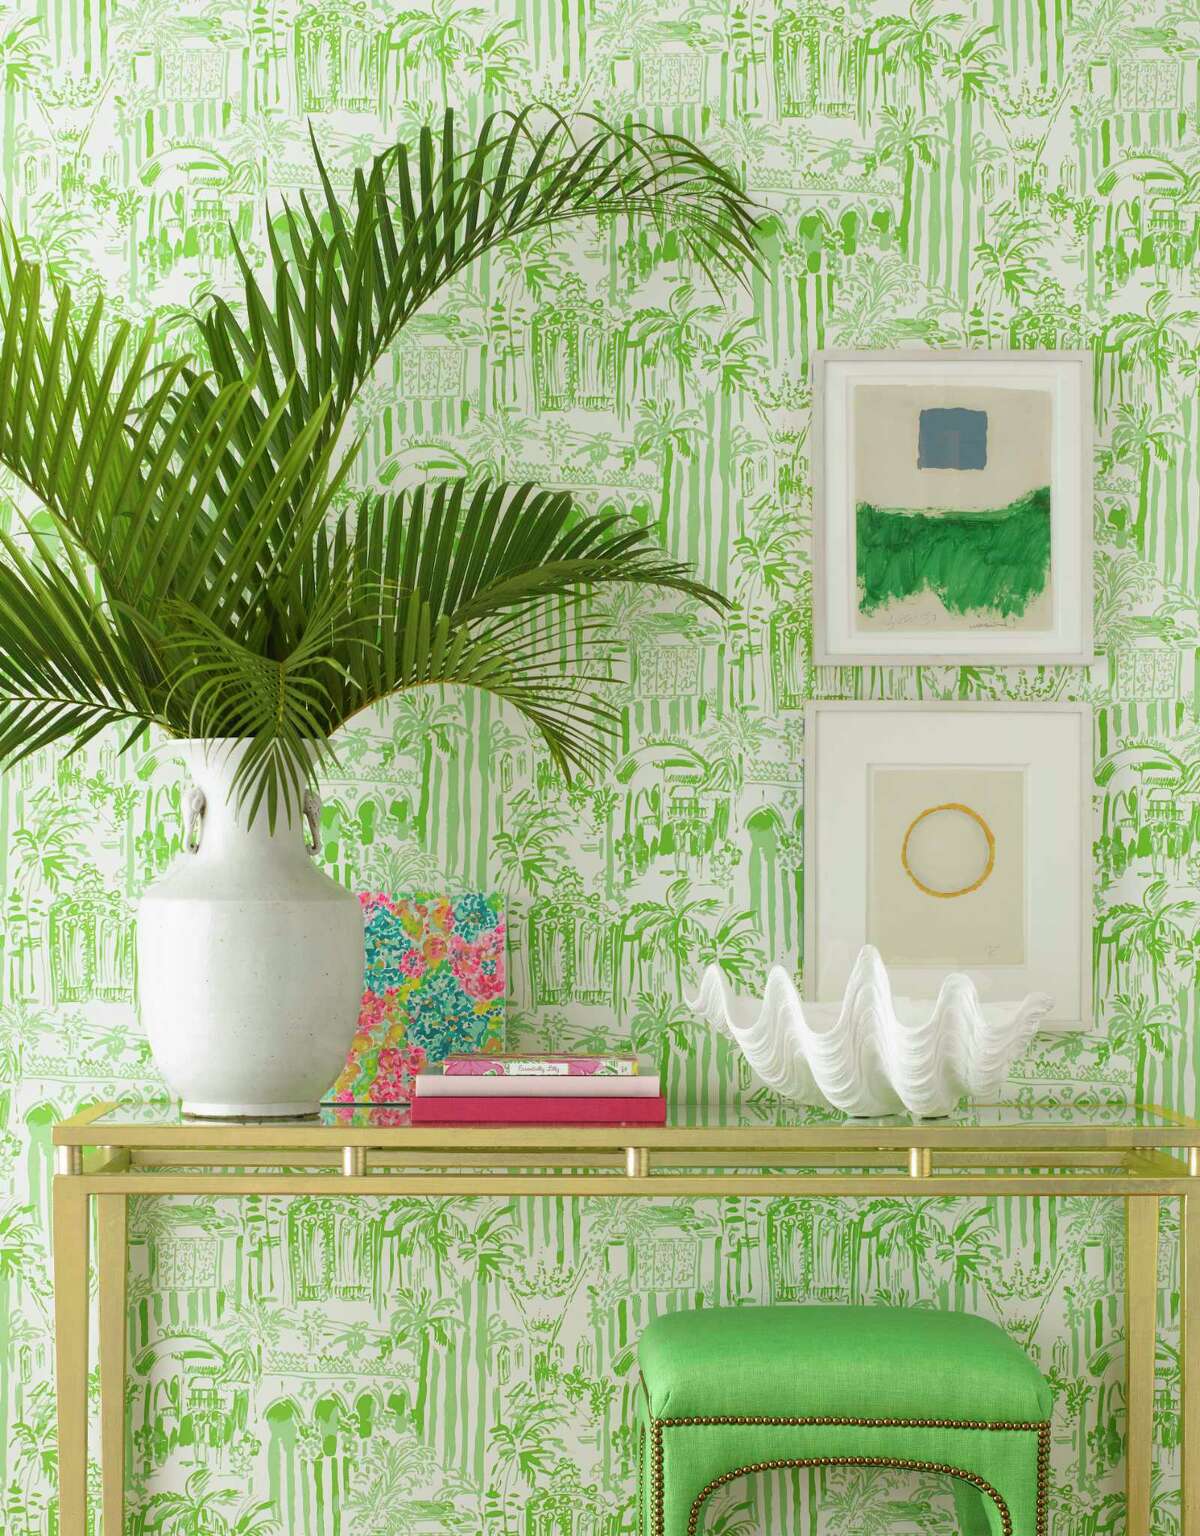 Tropical-themed wallpaper fromÂ Lilly Pulitzer II at Lee Jofa, leejofa.com. Starting at $130 per roll, it is available trade-only at the Kravet showroom at the Decorative Center of Houston, 5120 Woodway.